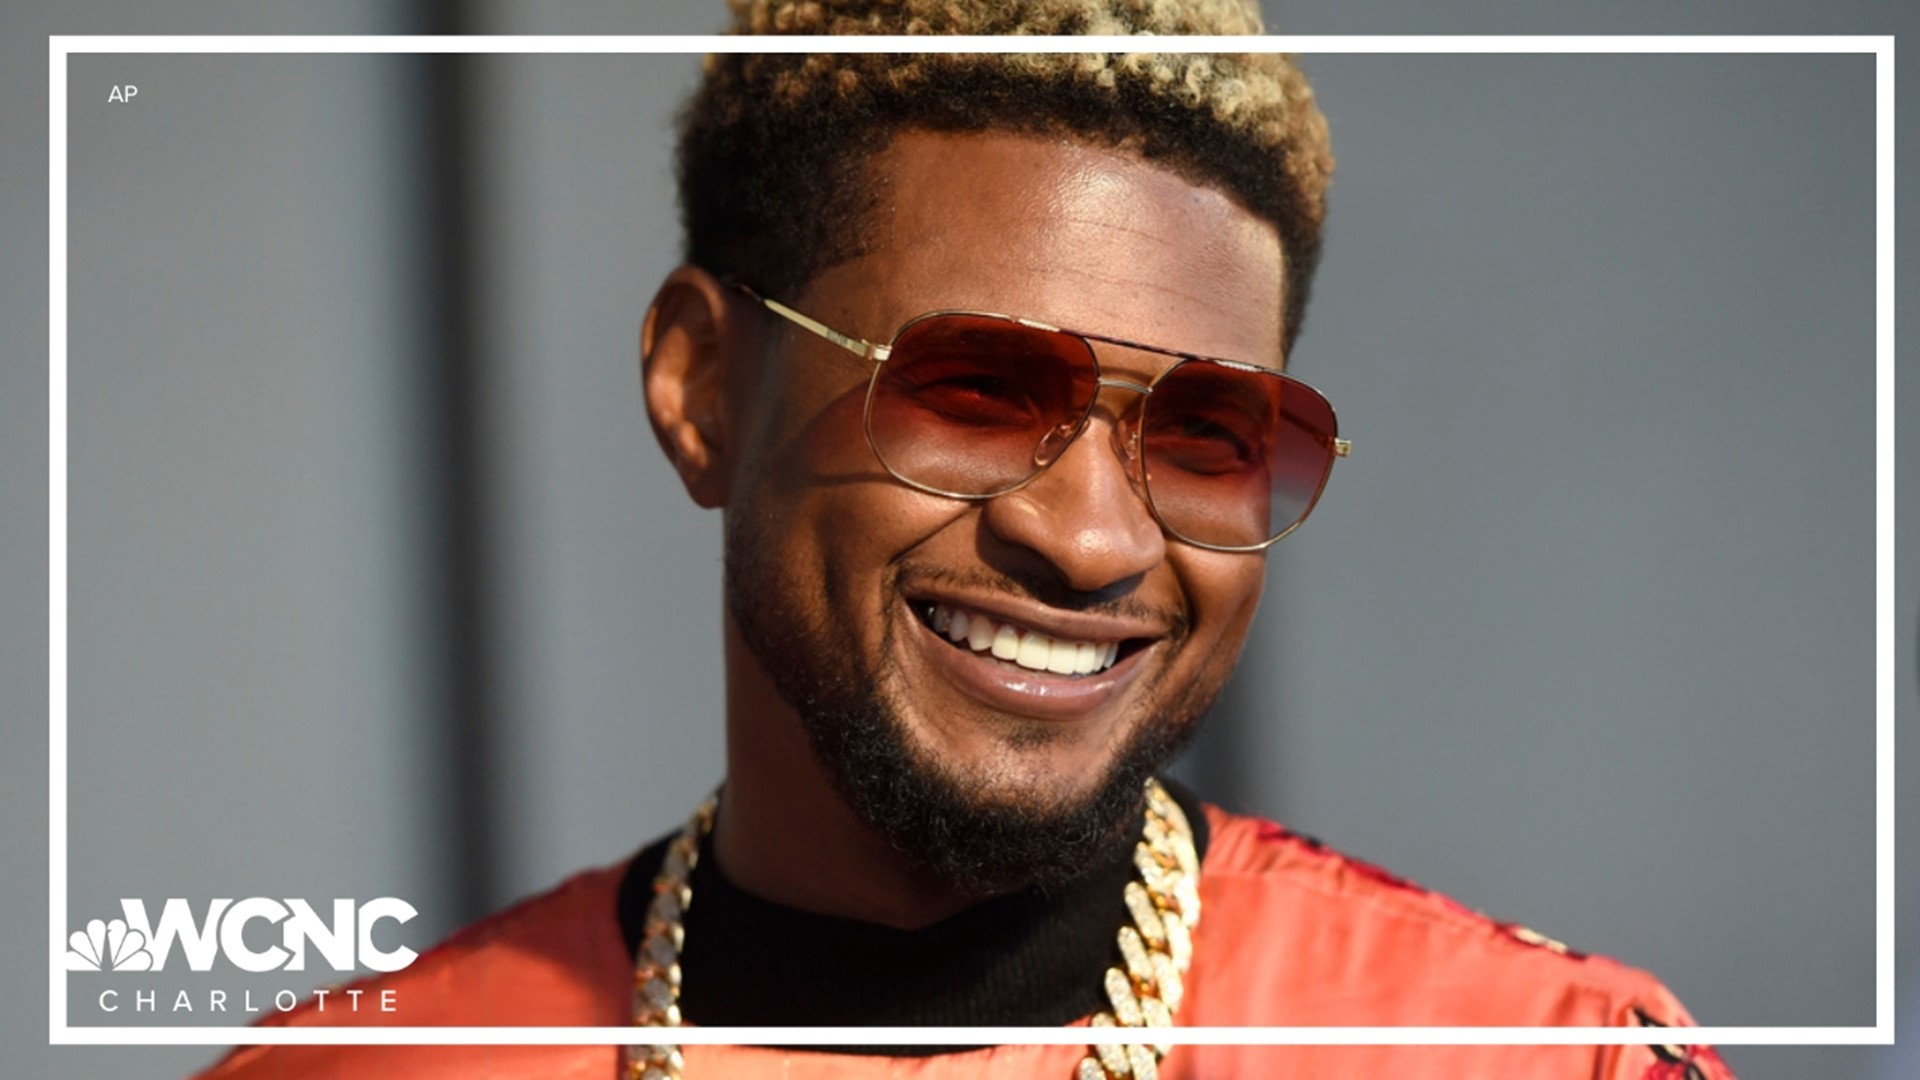 Usher announcing he's coming to Charlotte later this year!